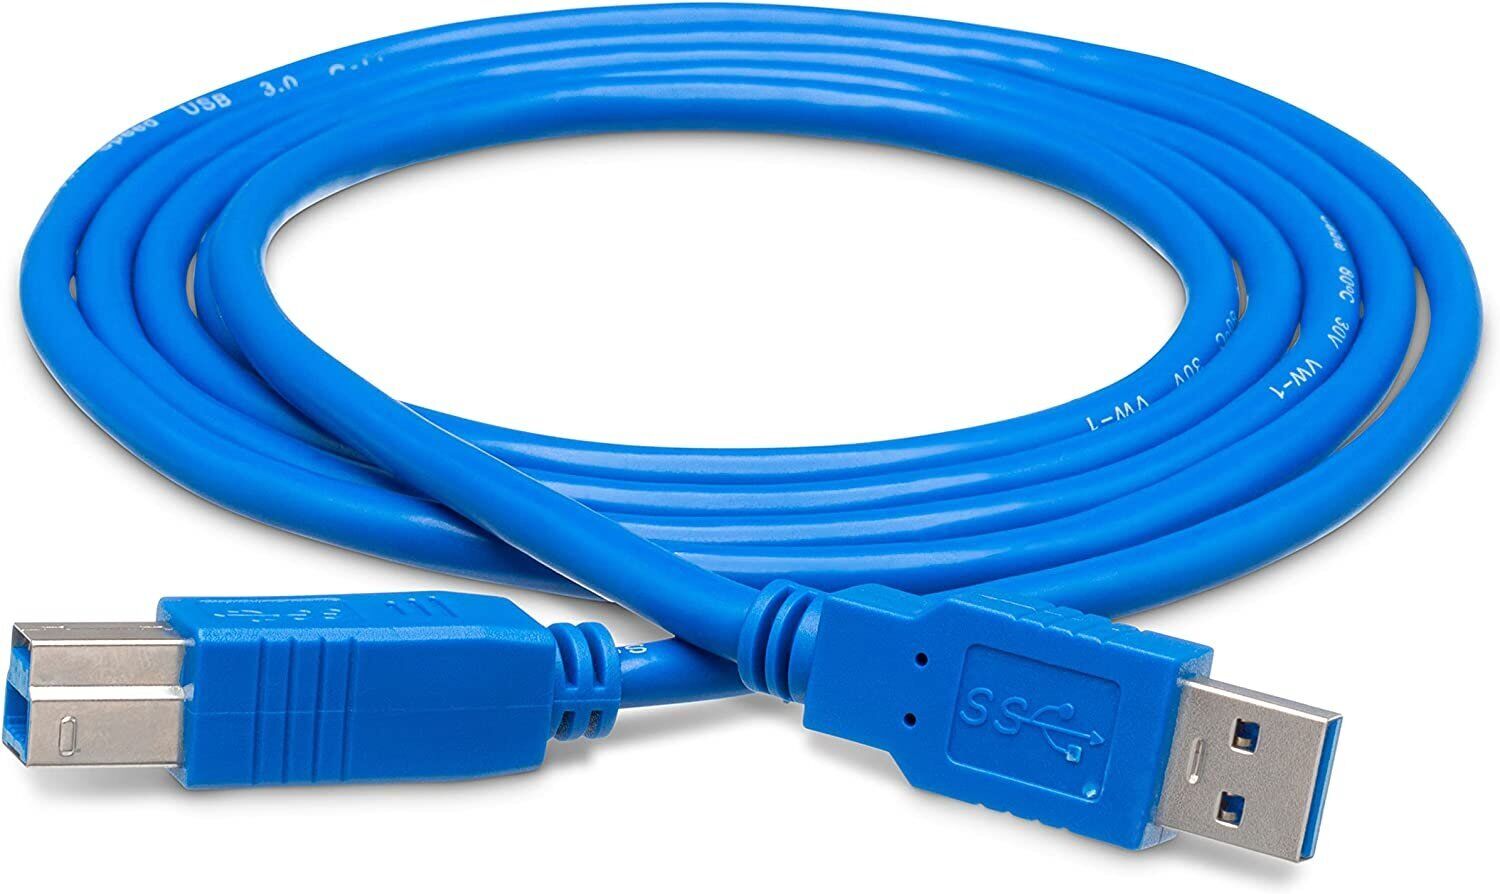 Hosa USB-306AB SuperSpeed USB 3.0 Cable, Type A to Type B, 6 feet